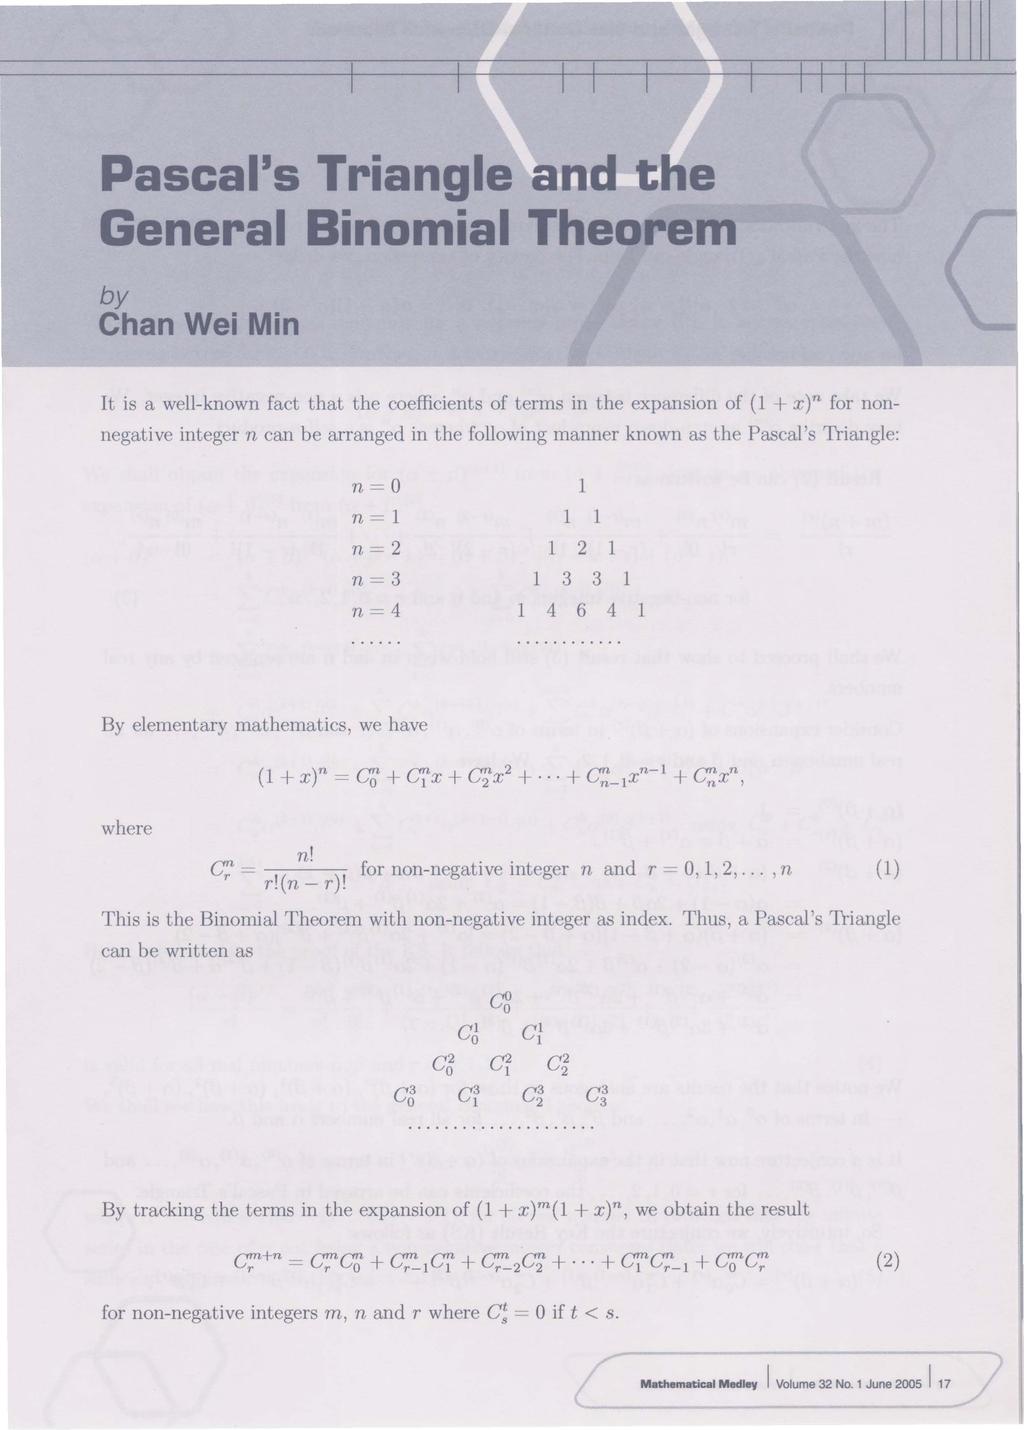 Pascal's Triangle and the General Binomial Theorem by Chan Wei Min It is a well-nown fact that the coefficients of terms in the expansion of (1 + x)n for nonnegative integer n can be arranged in the